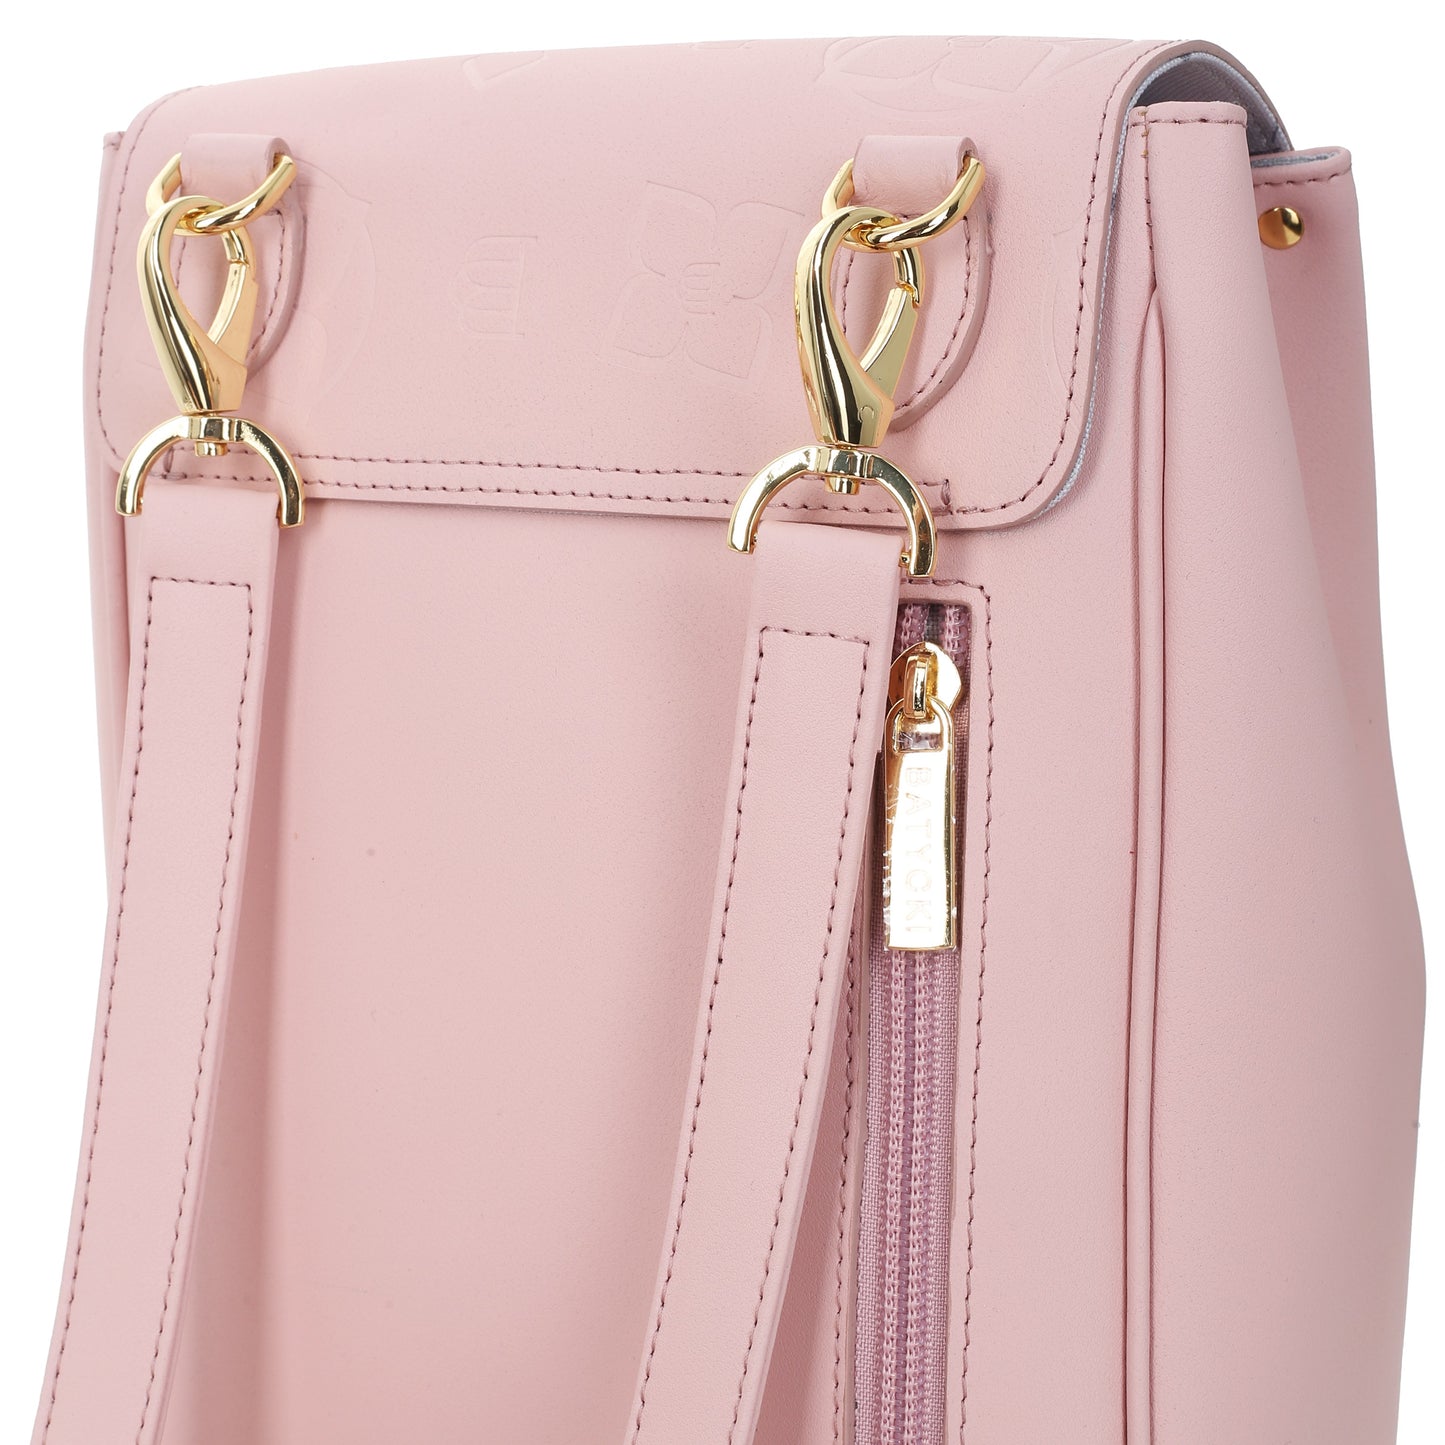 VICTORIA NAPA POWDER PINK women's leather backpack